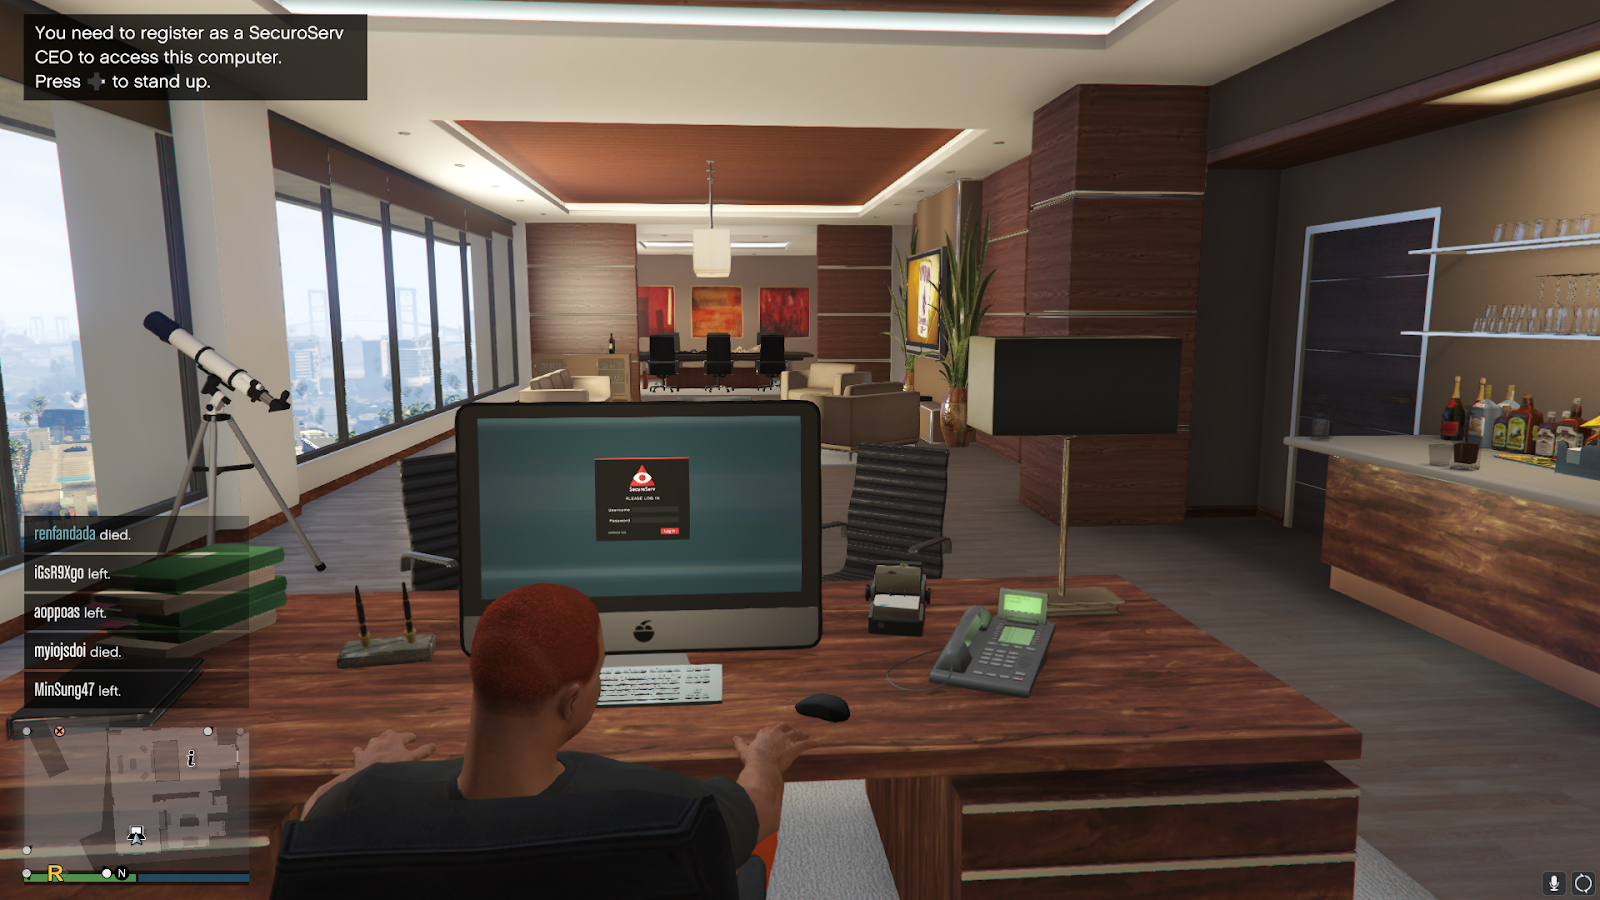 A player accesses a computer to make money in GTA Online. Image captured by VideoGamer.